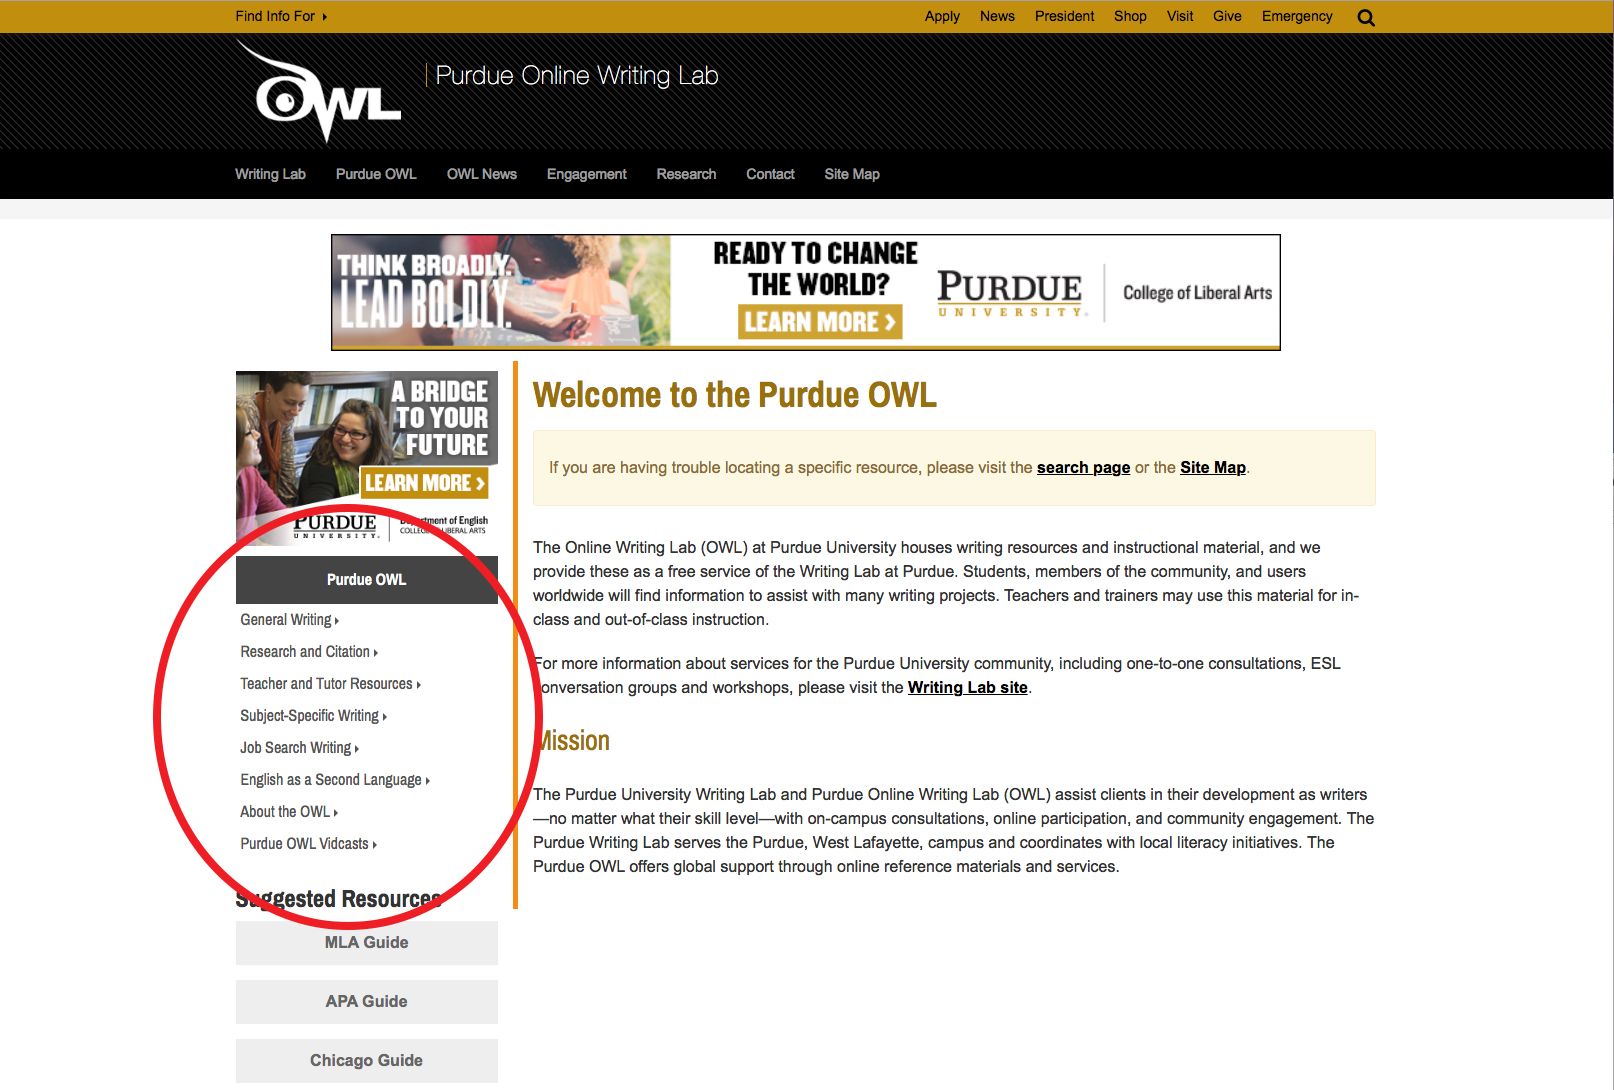 This image shows the OWL homepage with the navigation menu highlighted.